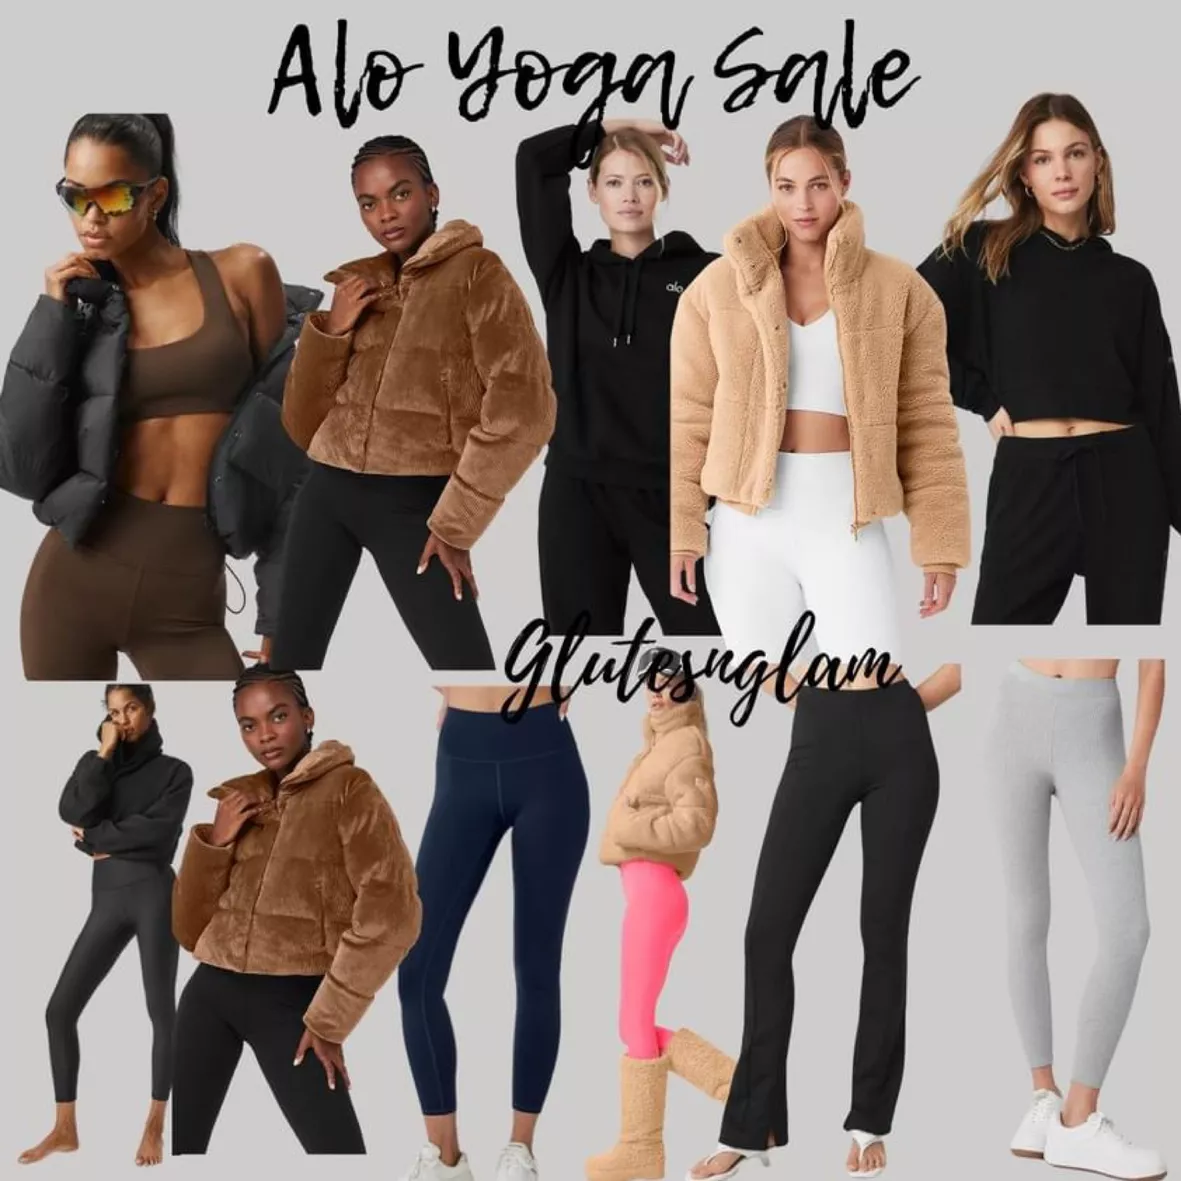 The Alo Yoga Sale Has Travel Clothes Up to 70% Off